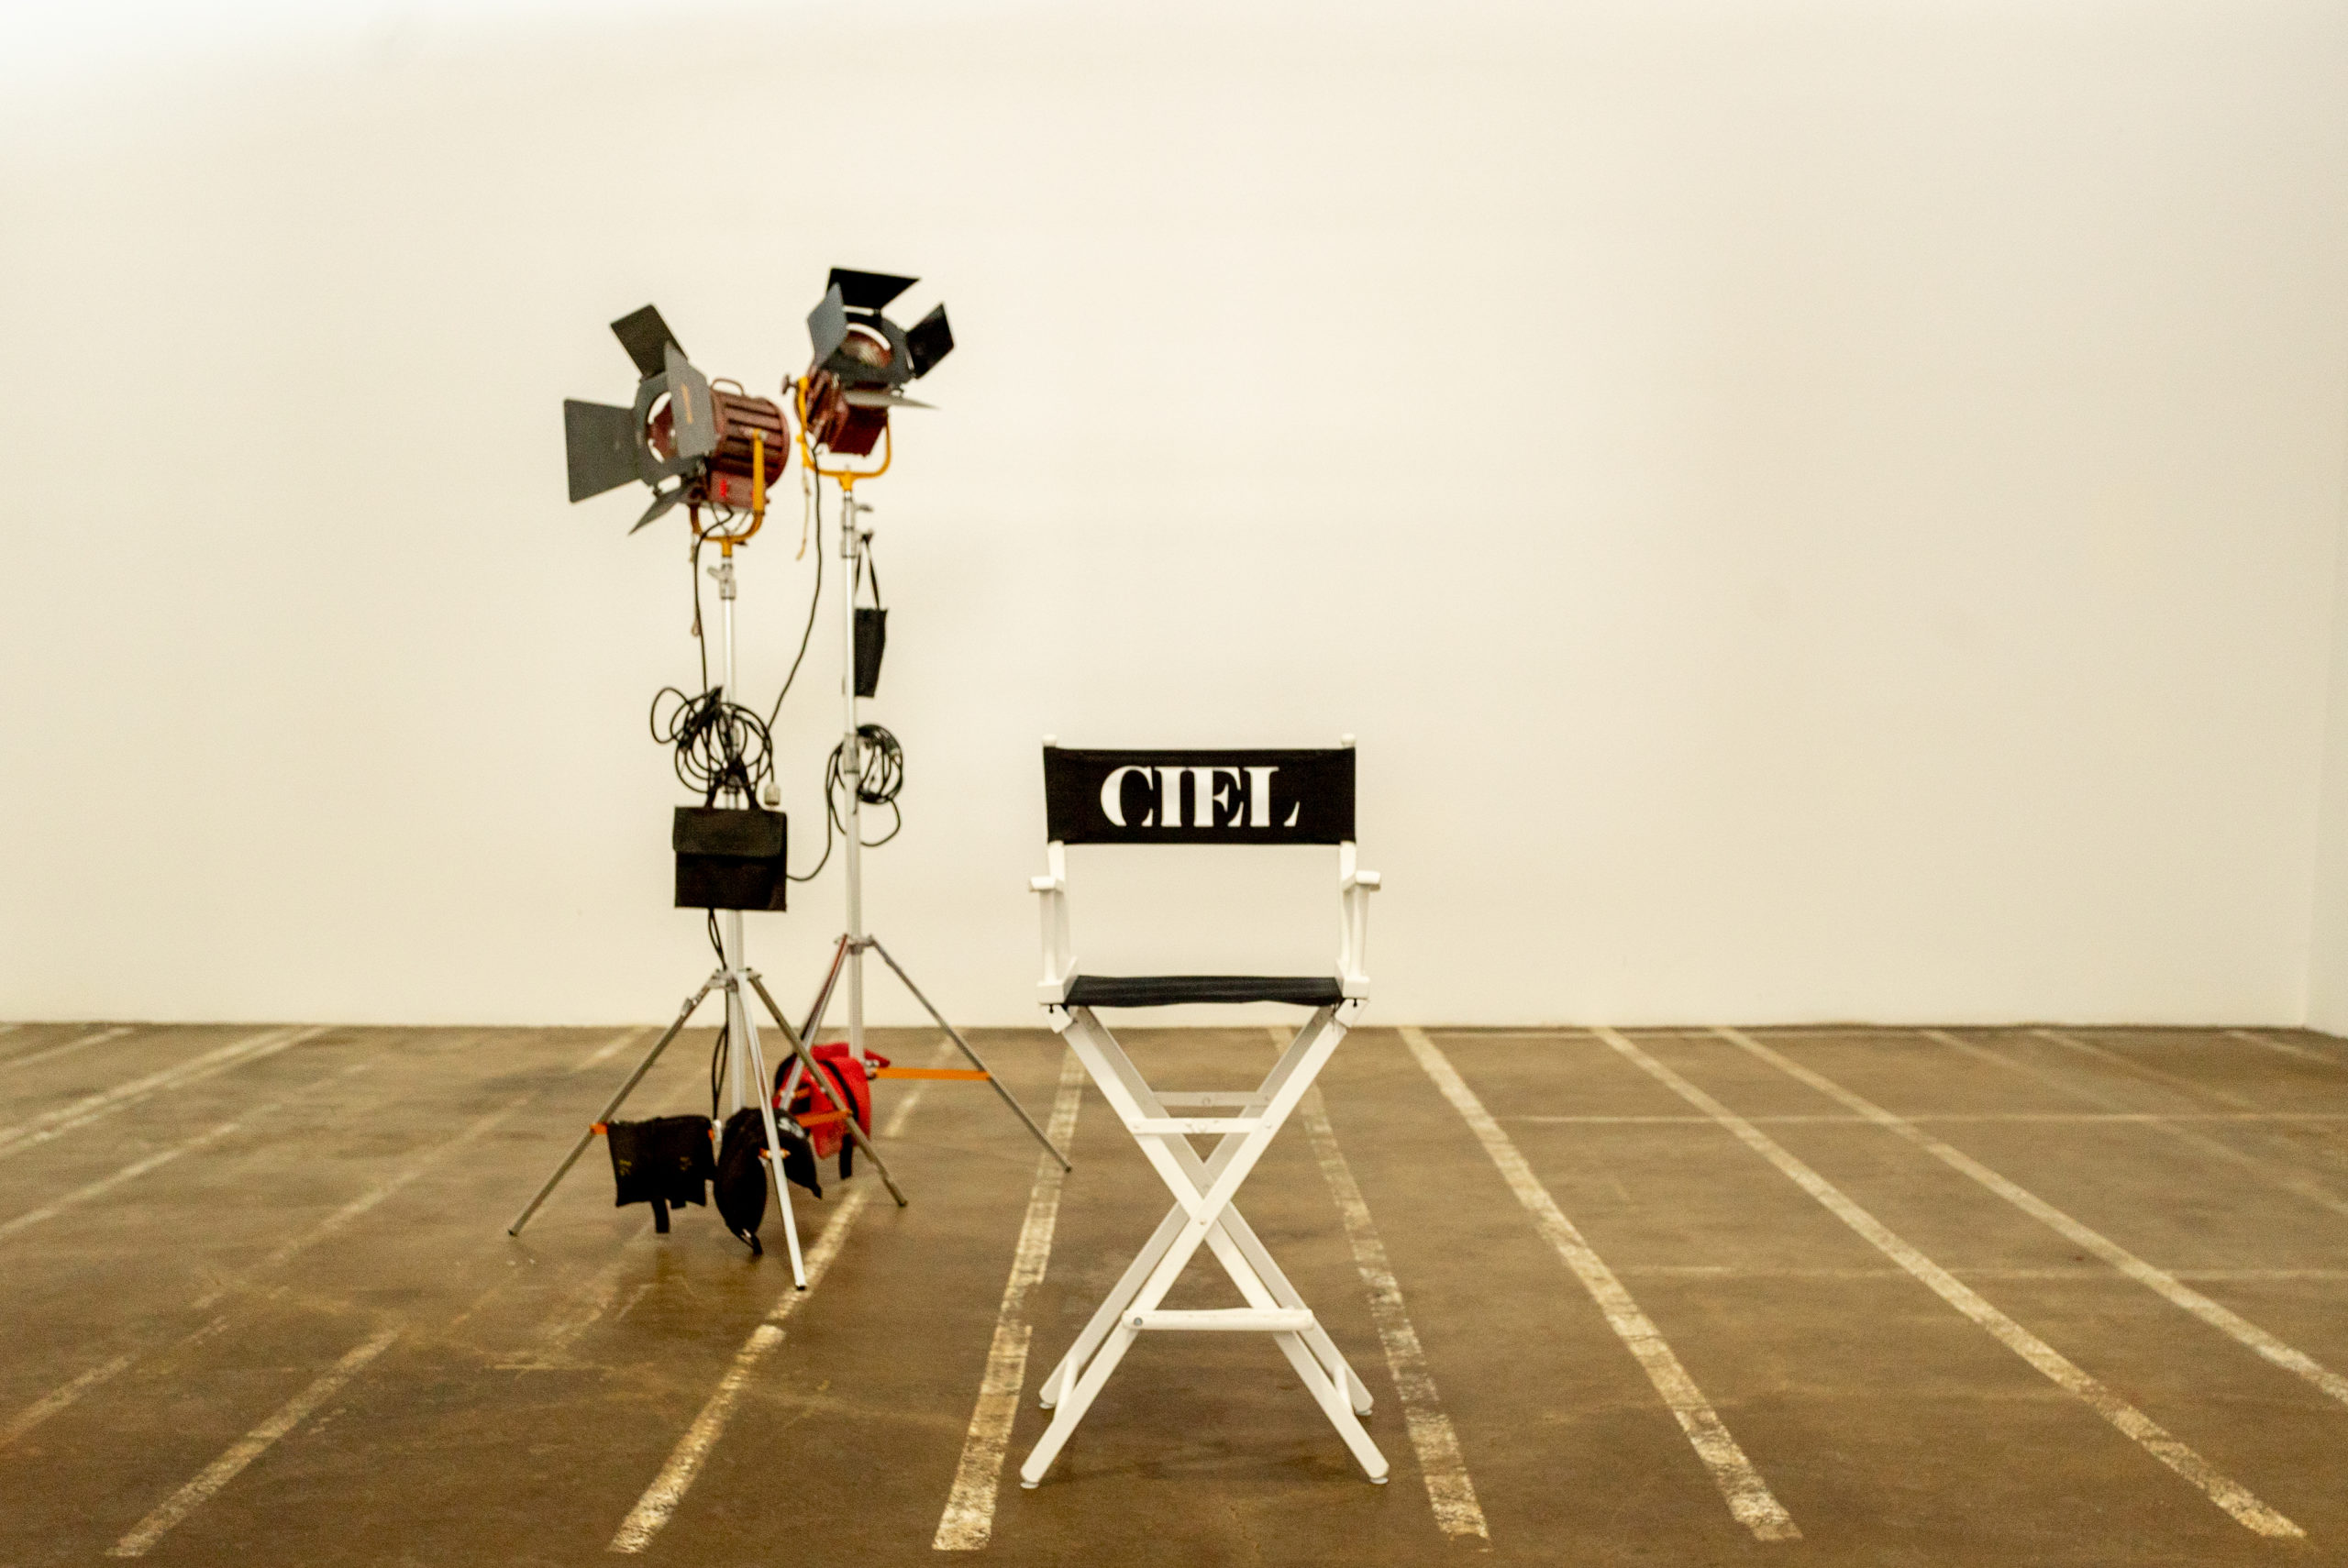 A close up view of two production lights and a black director's chair that says 